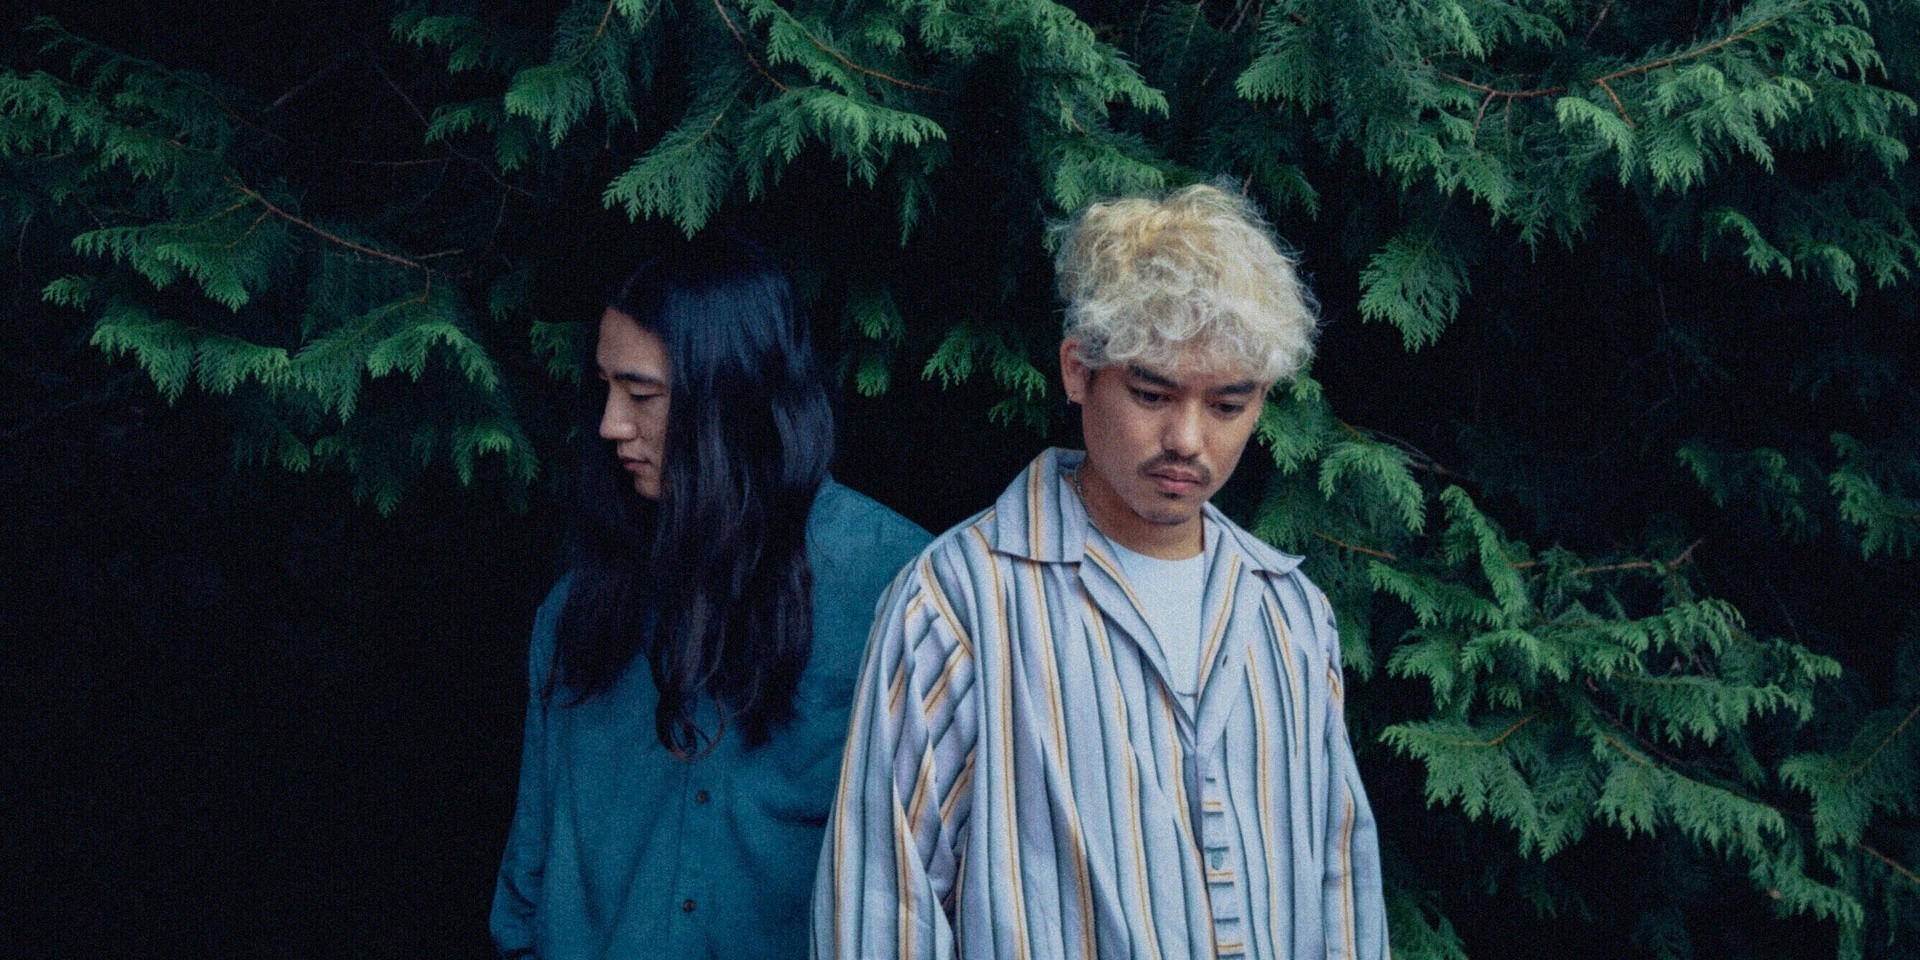 Asia Spotlight: Japanese indie band The fin. on achieving their dreams together: "I’m so happy and proud of what we have become."